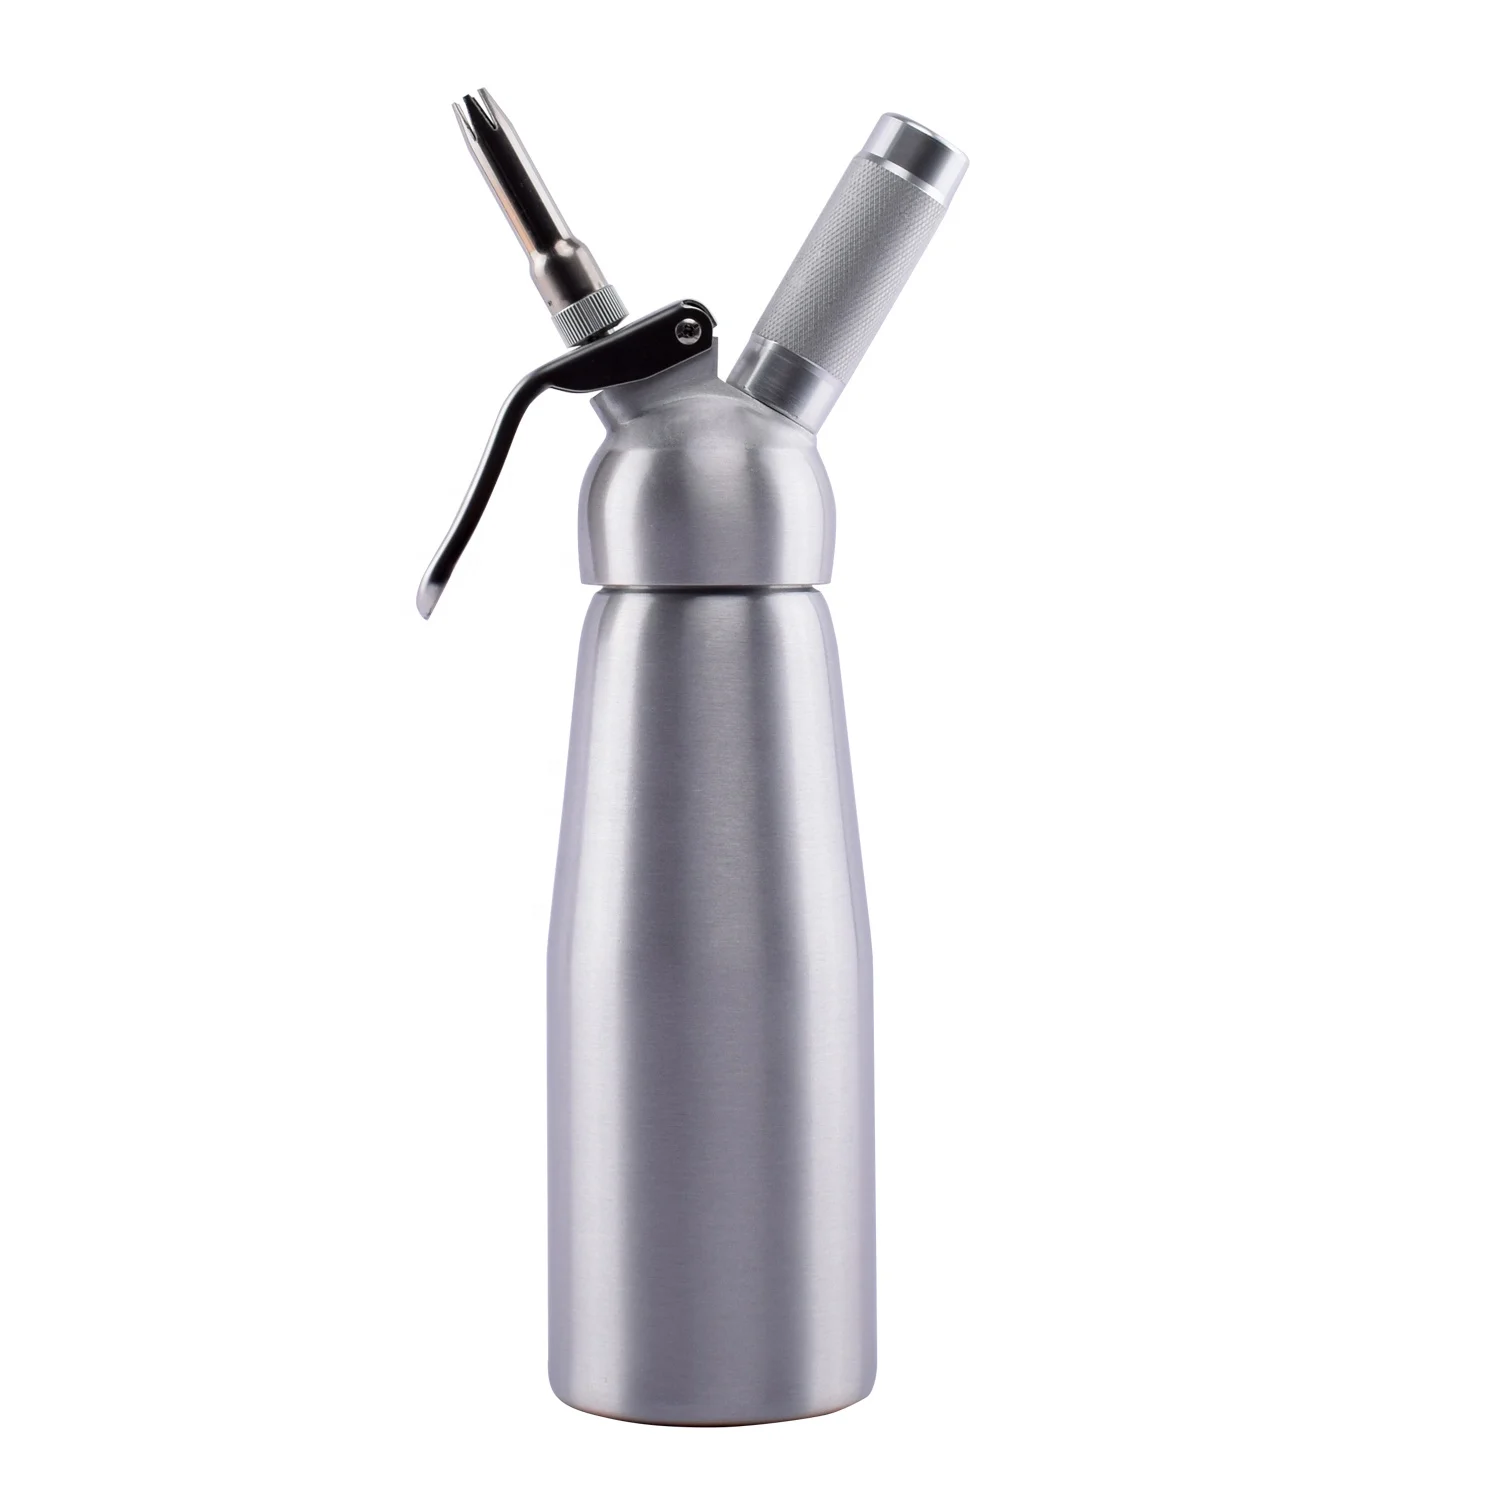 

TUV approved 500ml Aluminum Whipped Cream Dispenser with Stainless Steel Decorating Tips